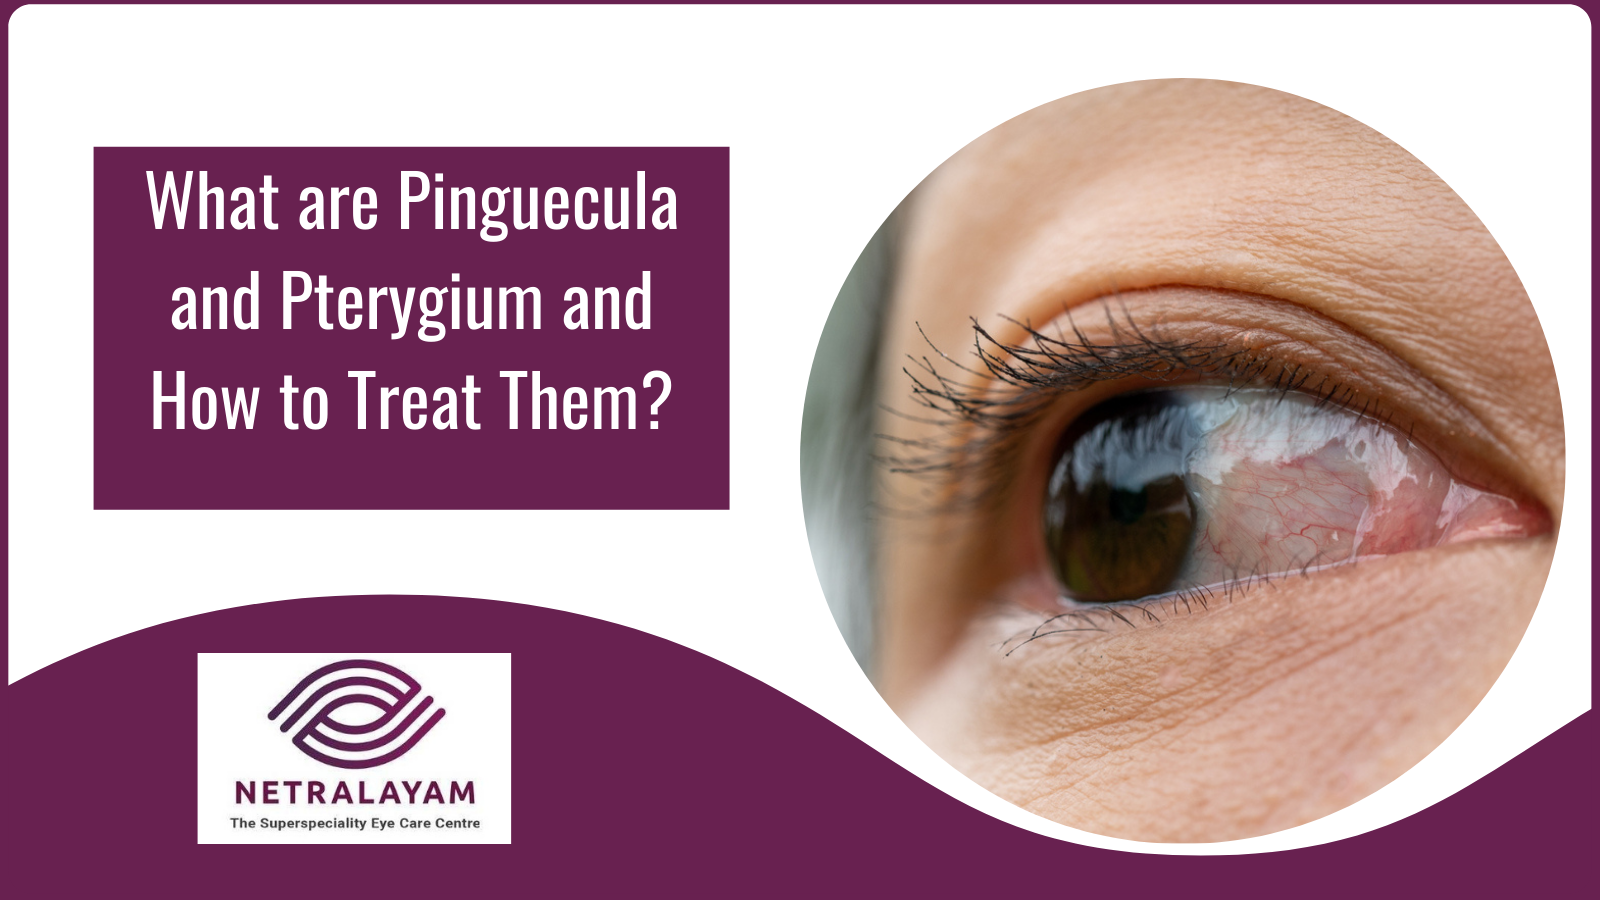 What are Pinguecula and Pterygium and How to Treat Them?